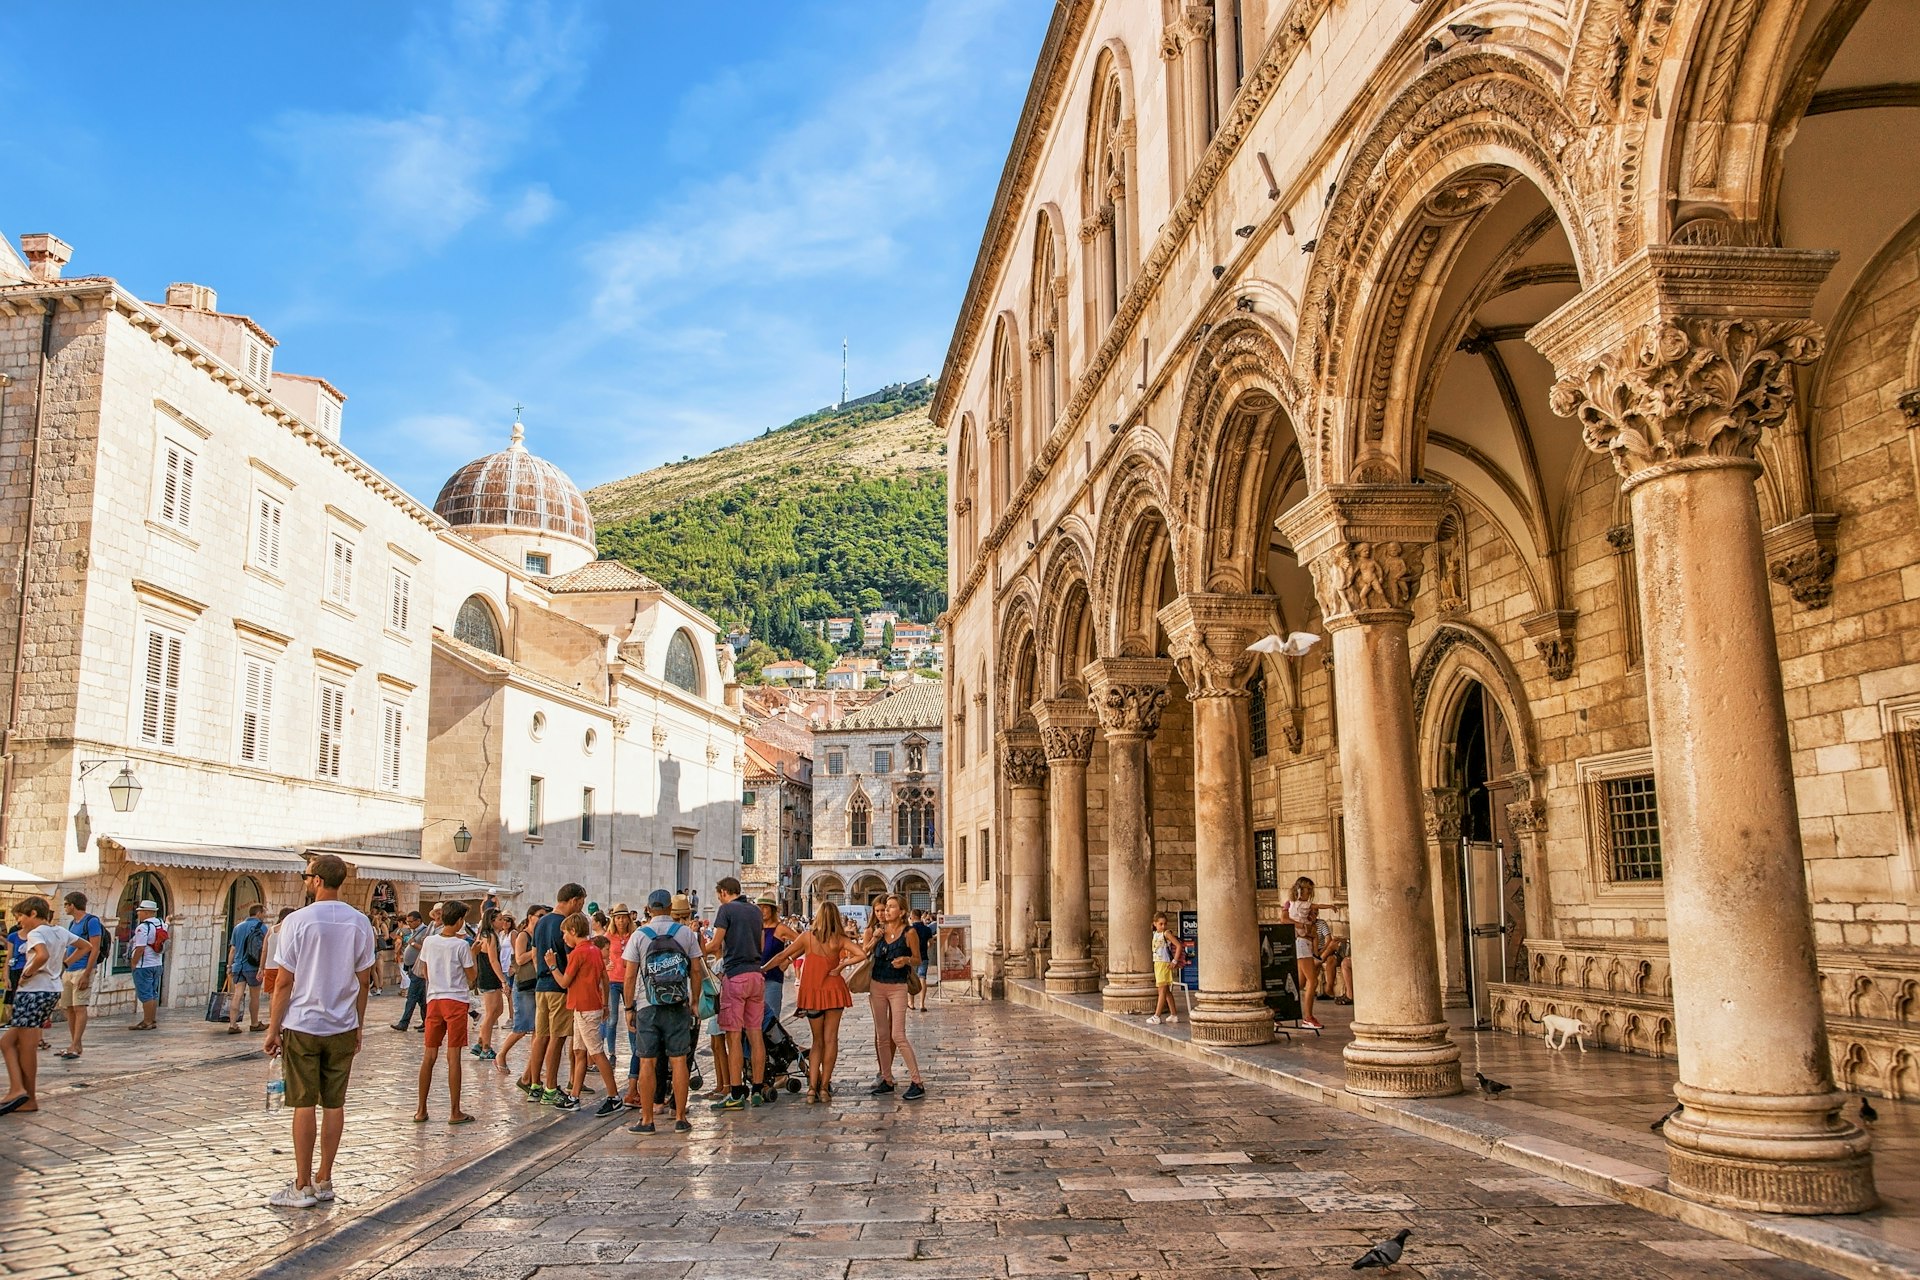 People at Rector Palace on Stradun Street in the old city of Dubrovnik, Croatia